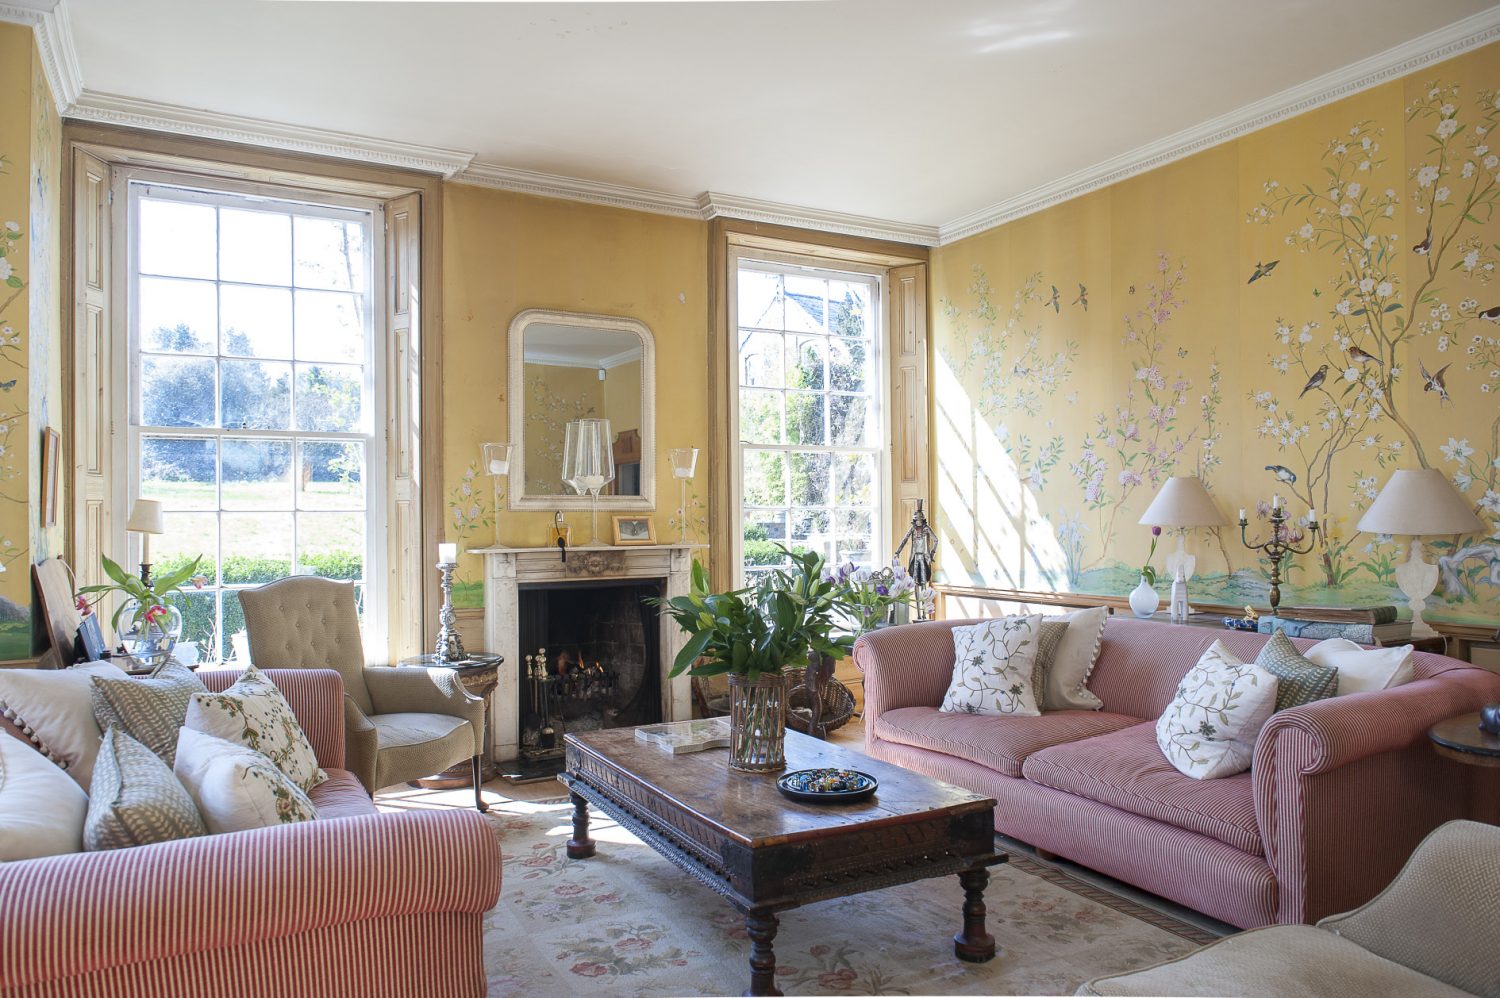 The drawing room, with its open fire and huge sash windows, overlooks the lawn and mature gardens. Christel has had the Conran sofas for many years, while the Indian ‘elephant table’ belonged to Lord Cowdrey and came from Bangalore. Josef Holst painted the Chinese-style murals